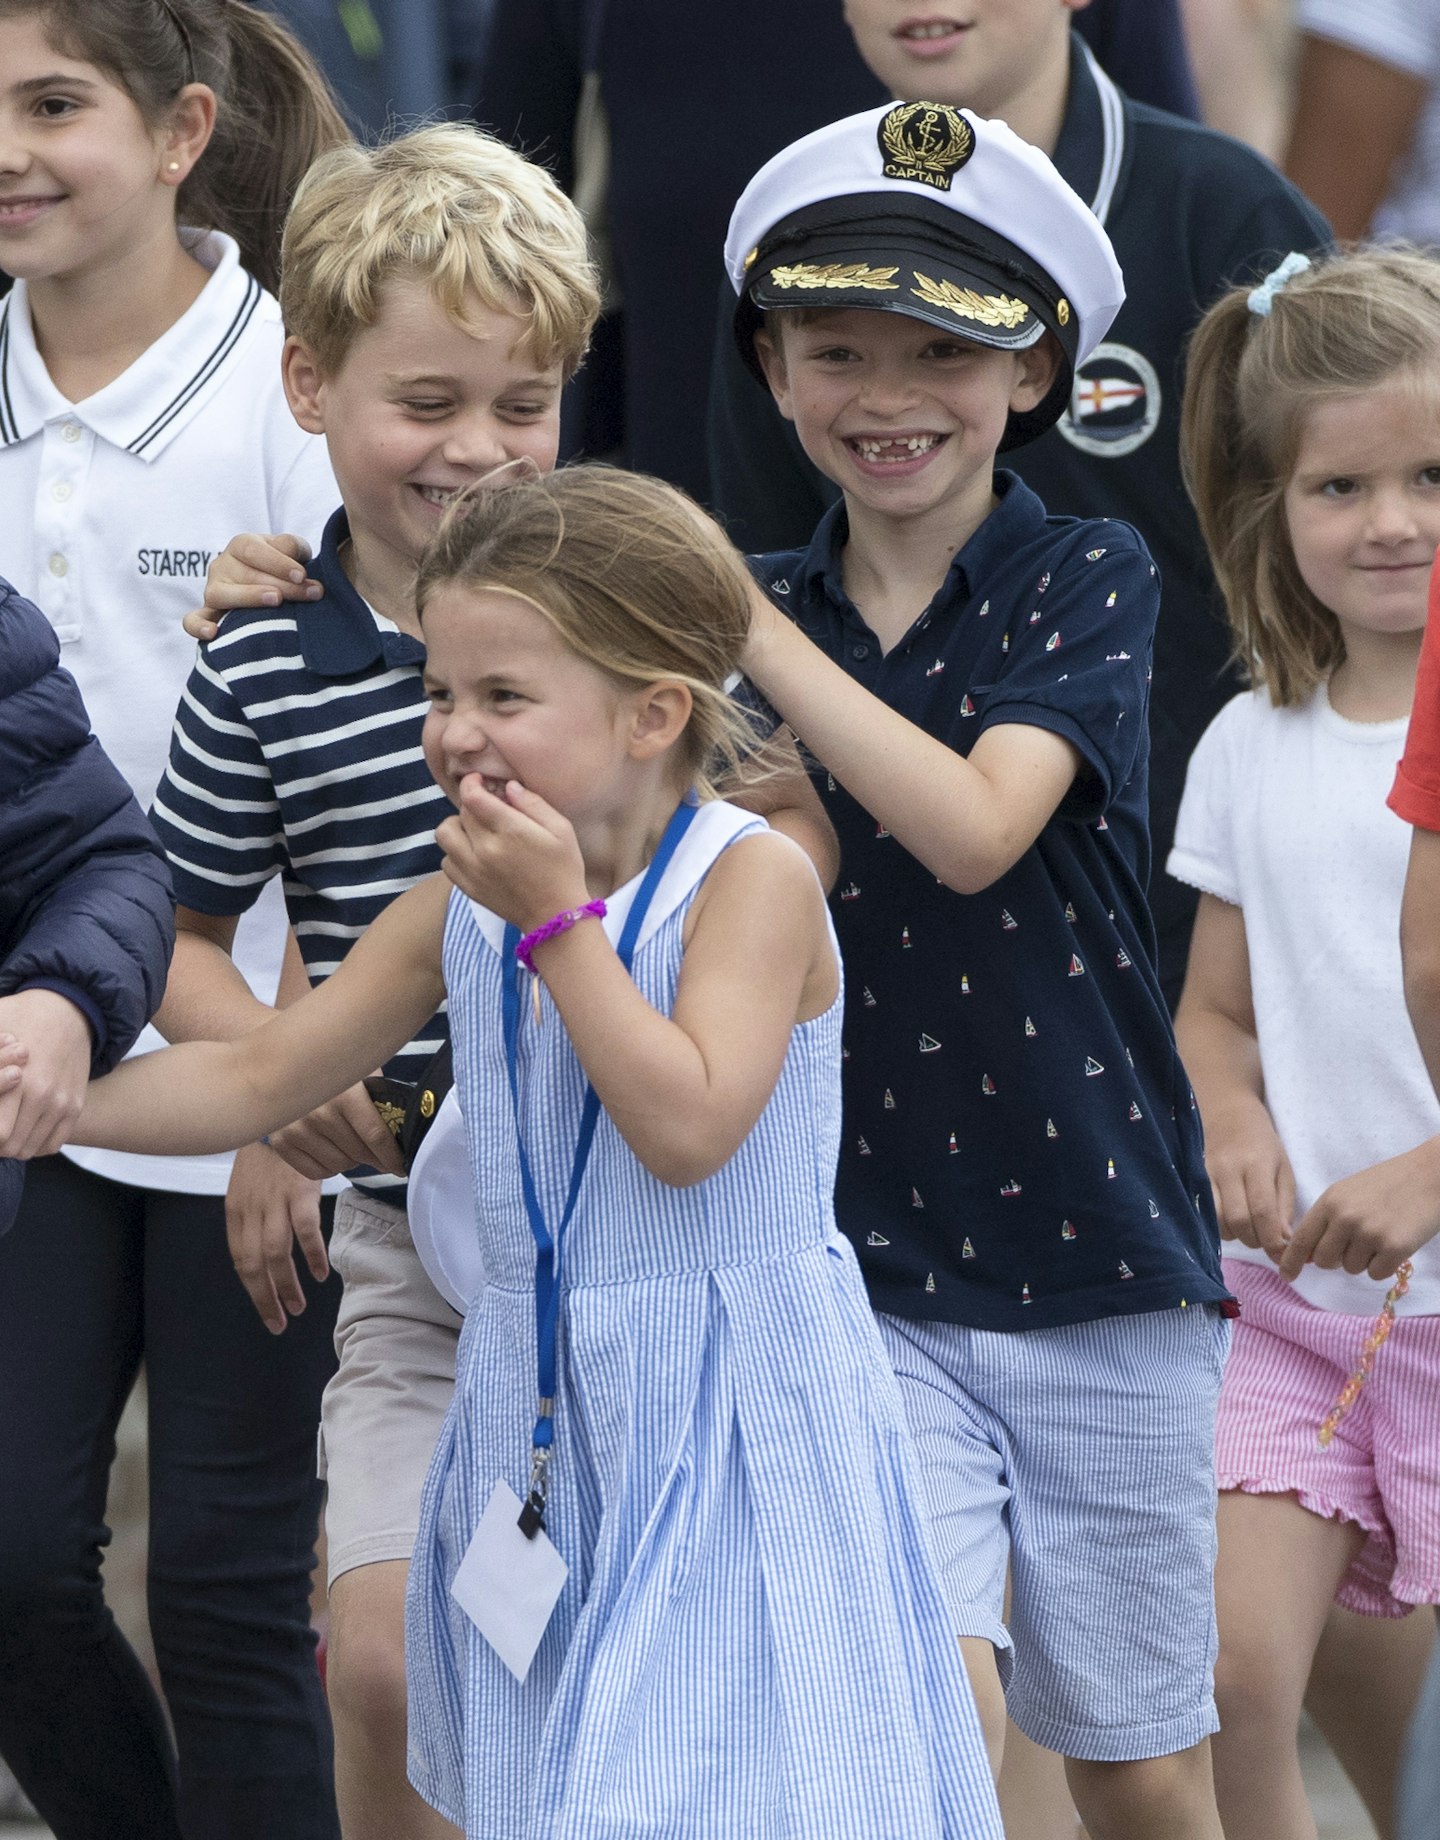 Princess Charlotte stuck her tongue out while wearing a gorgeous blue and white dress.